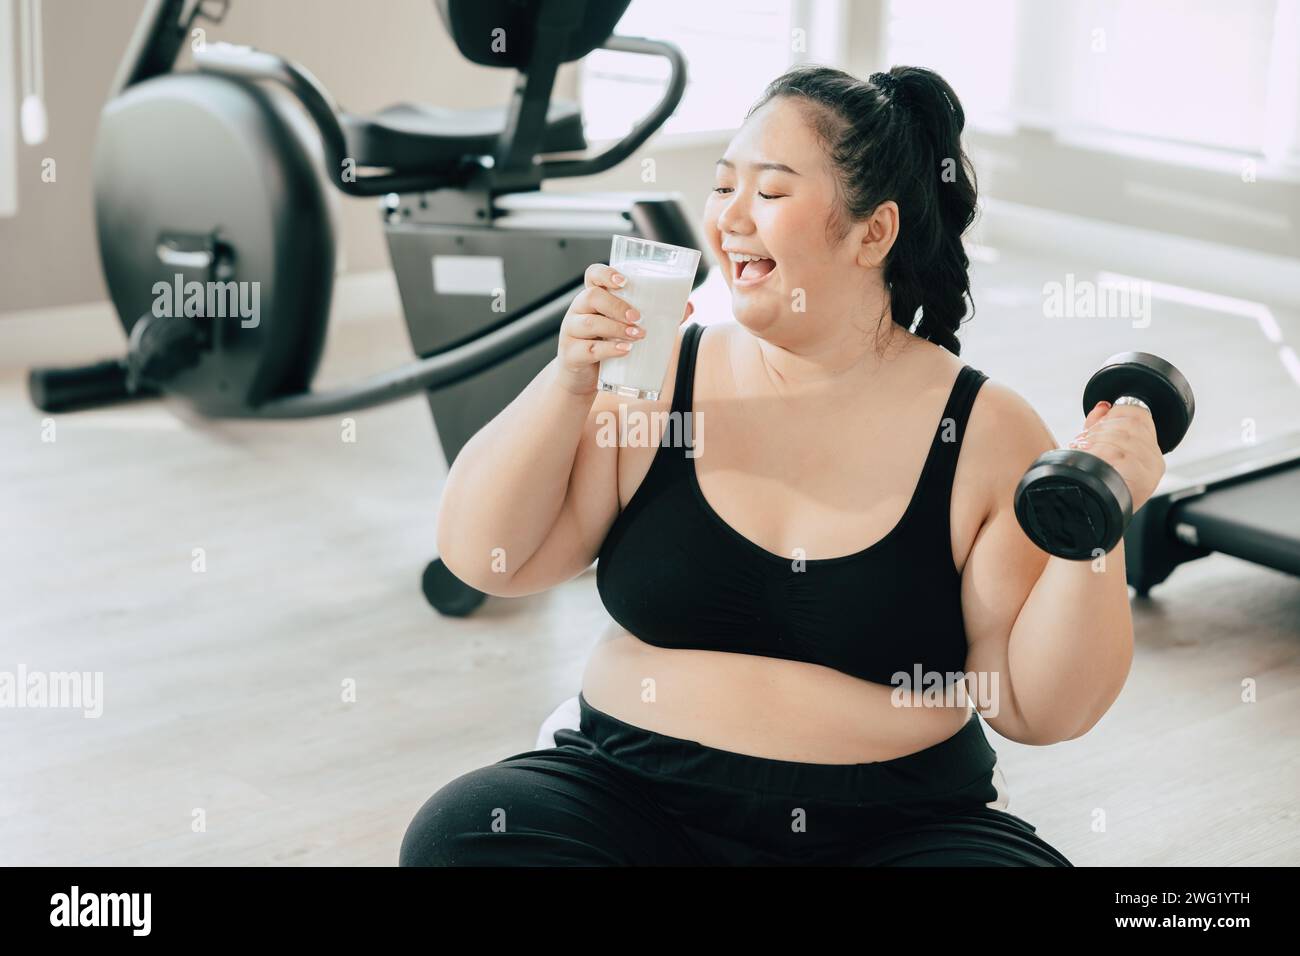 sport healthy fat women happy smiling enjoy drink milk and diet exercise activity in fitness sport club Stock Photo